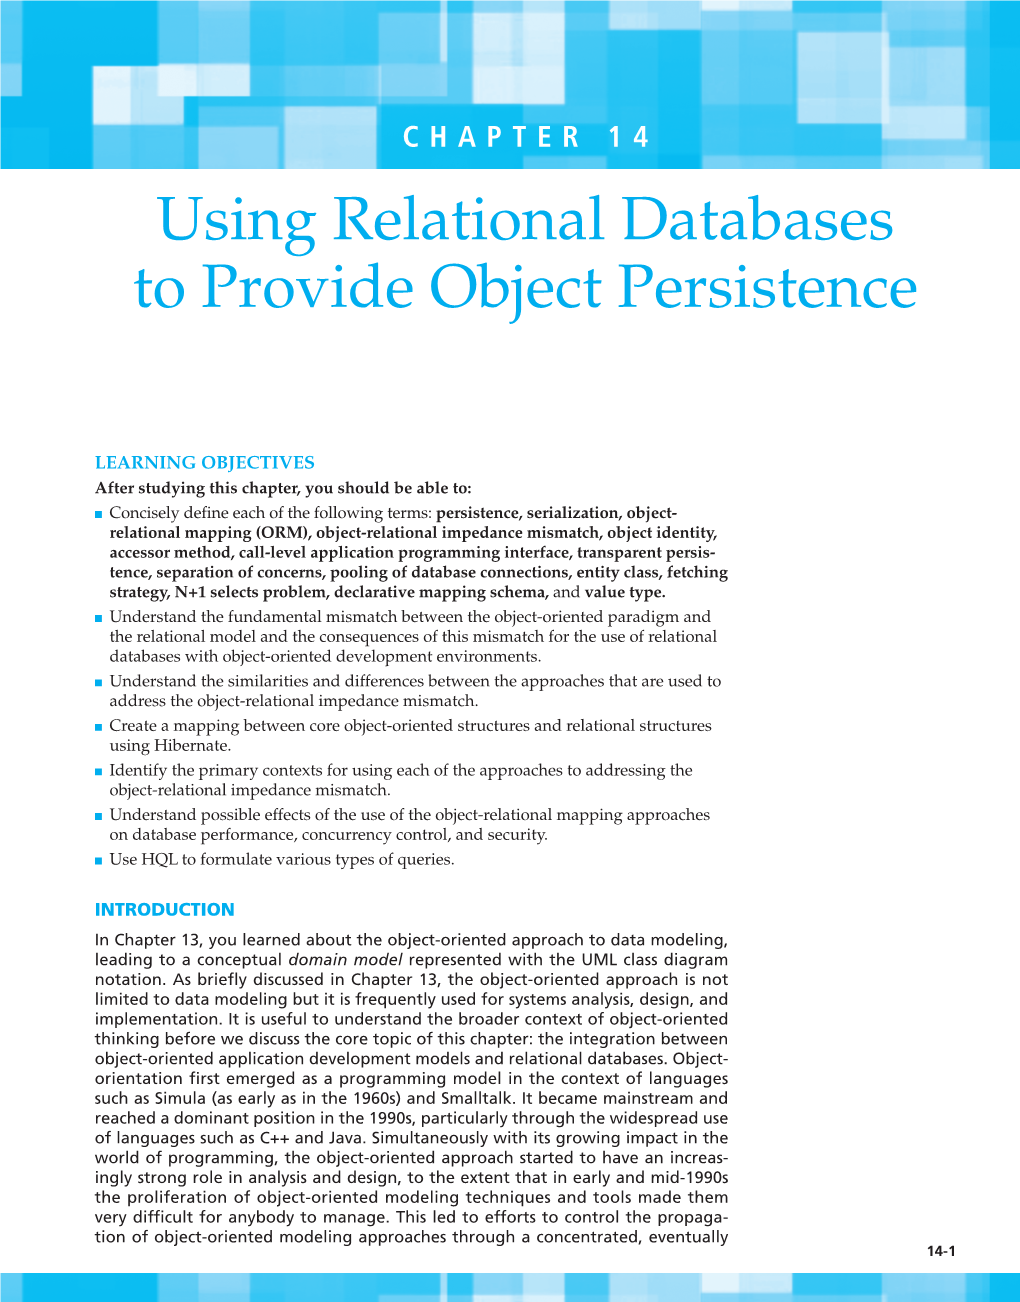 Chapter 14: Using Relational Databases to Provide Object Persistence